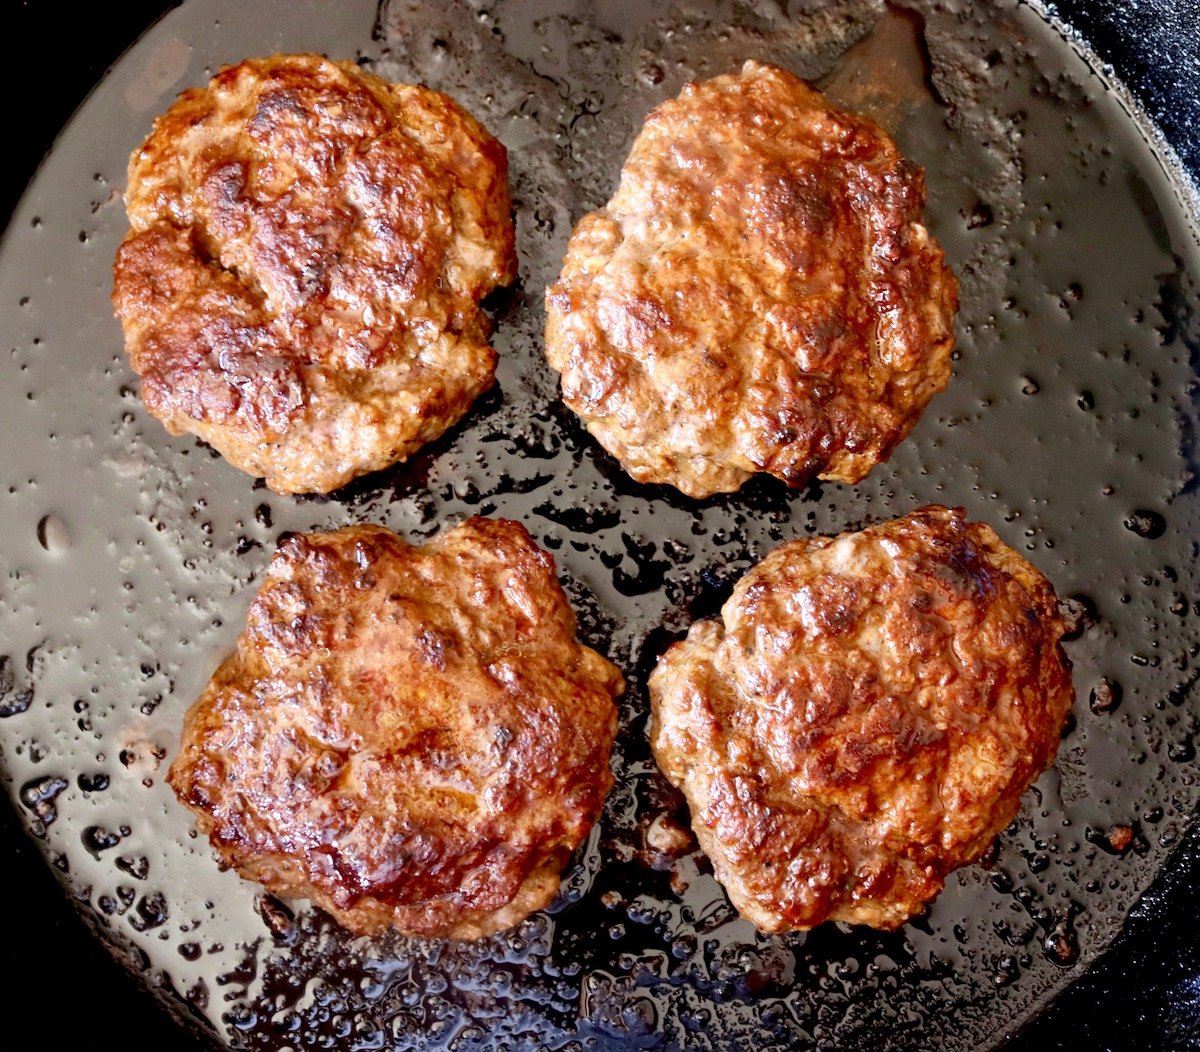 4 browned, cooked meat patties in a cast iron skillet.